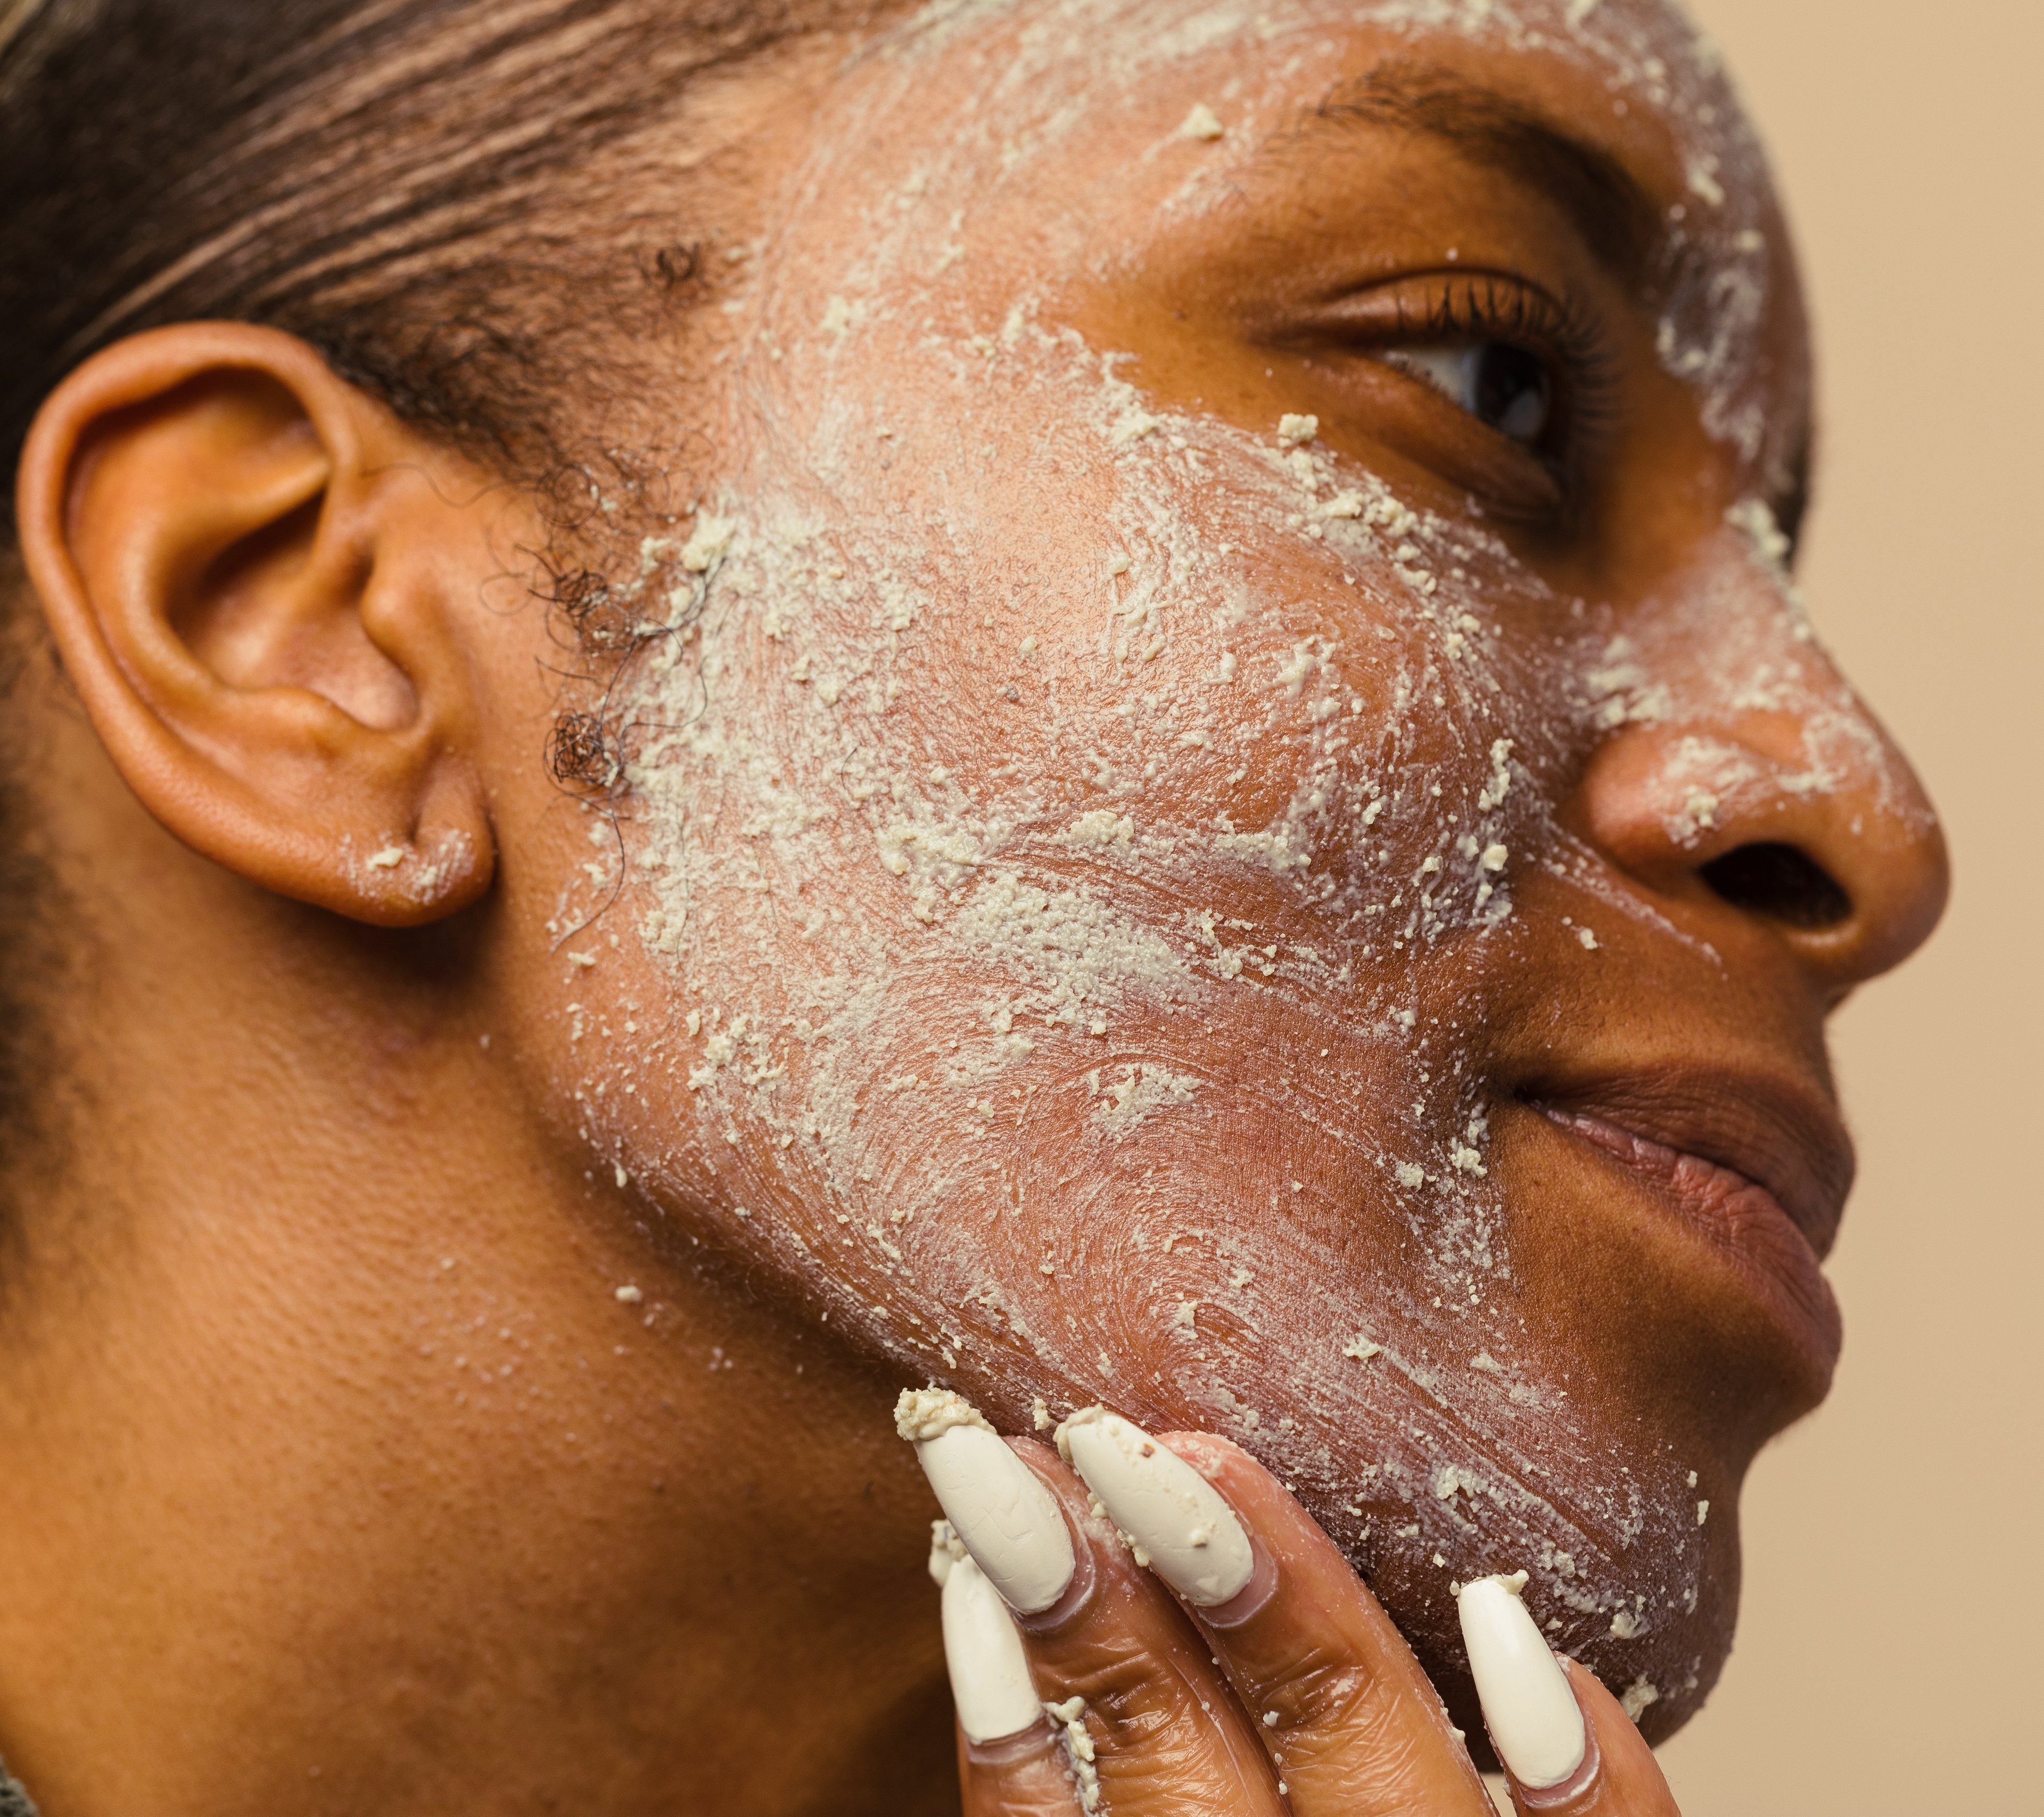 A face is seen side on, cheek being cupped, covered in Angels on Bare Skin, a cream-coloured, textured fresh cleanser.